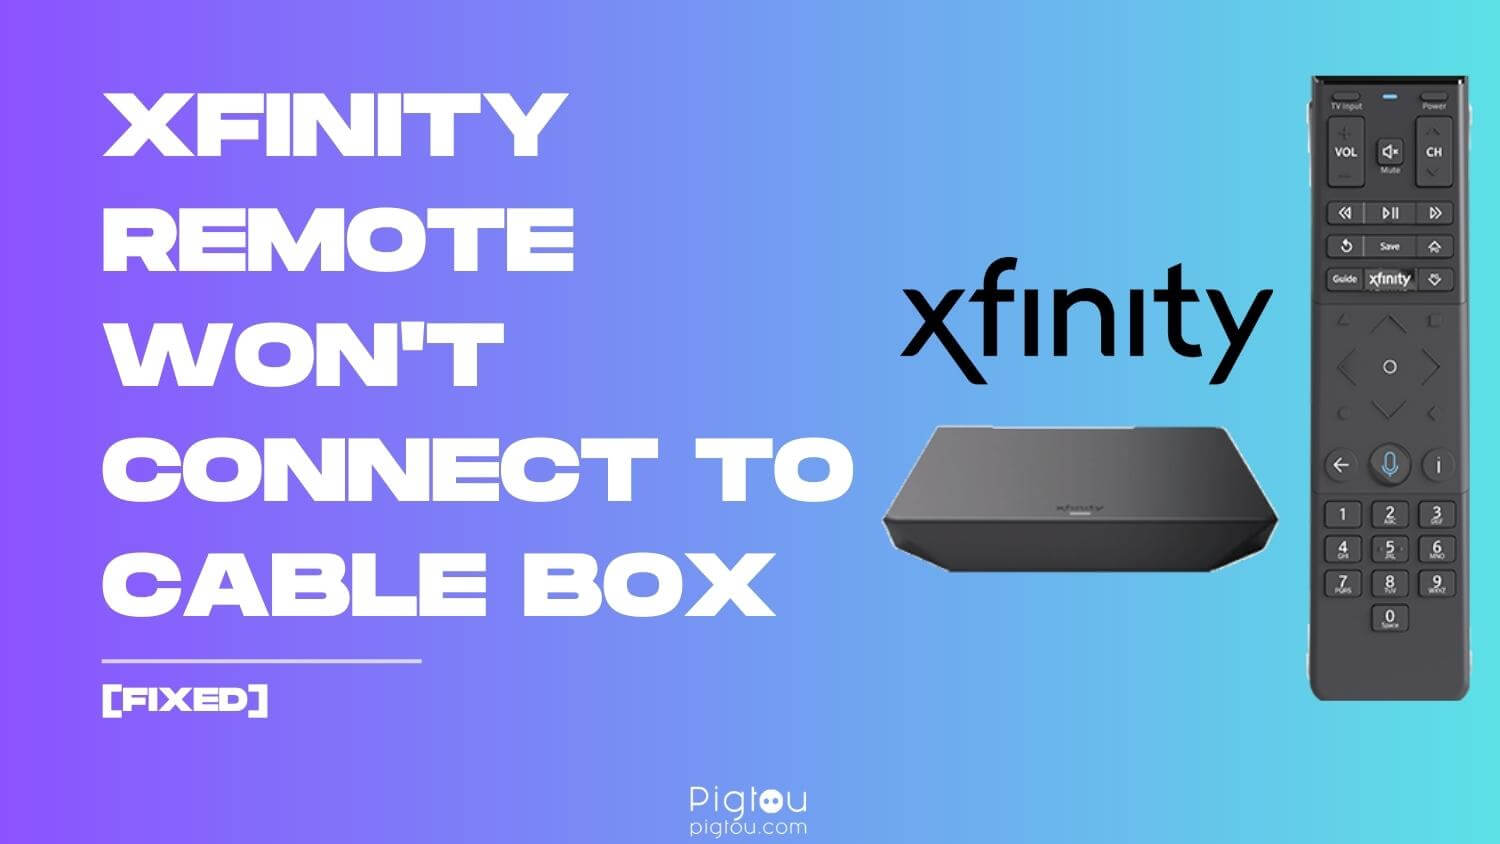 Xfinity Remote Won't Connect to Cable Box [FIXED!]